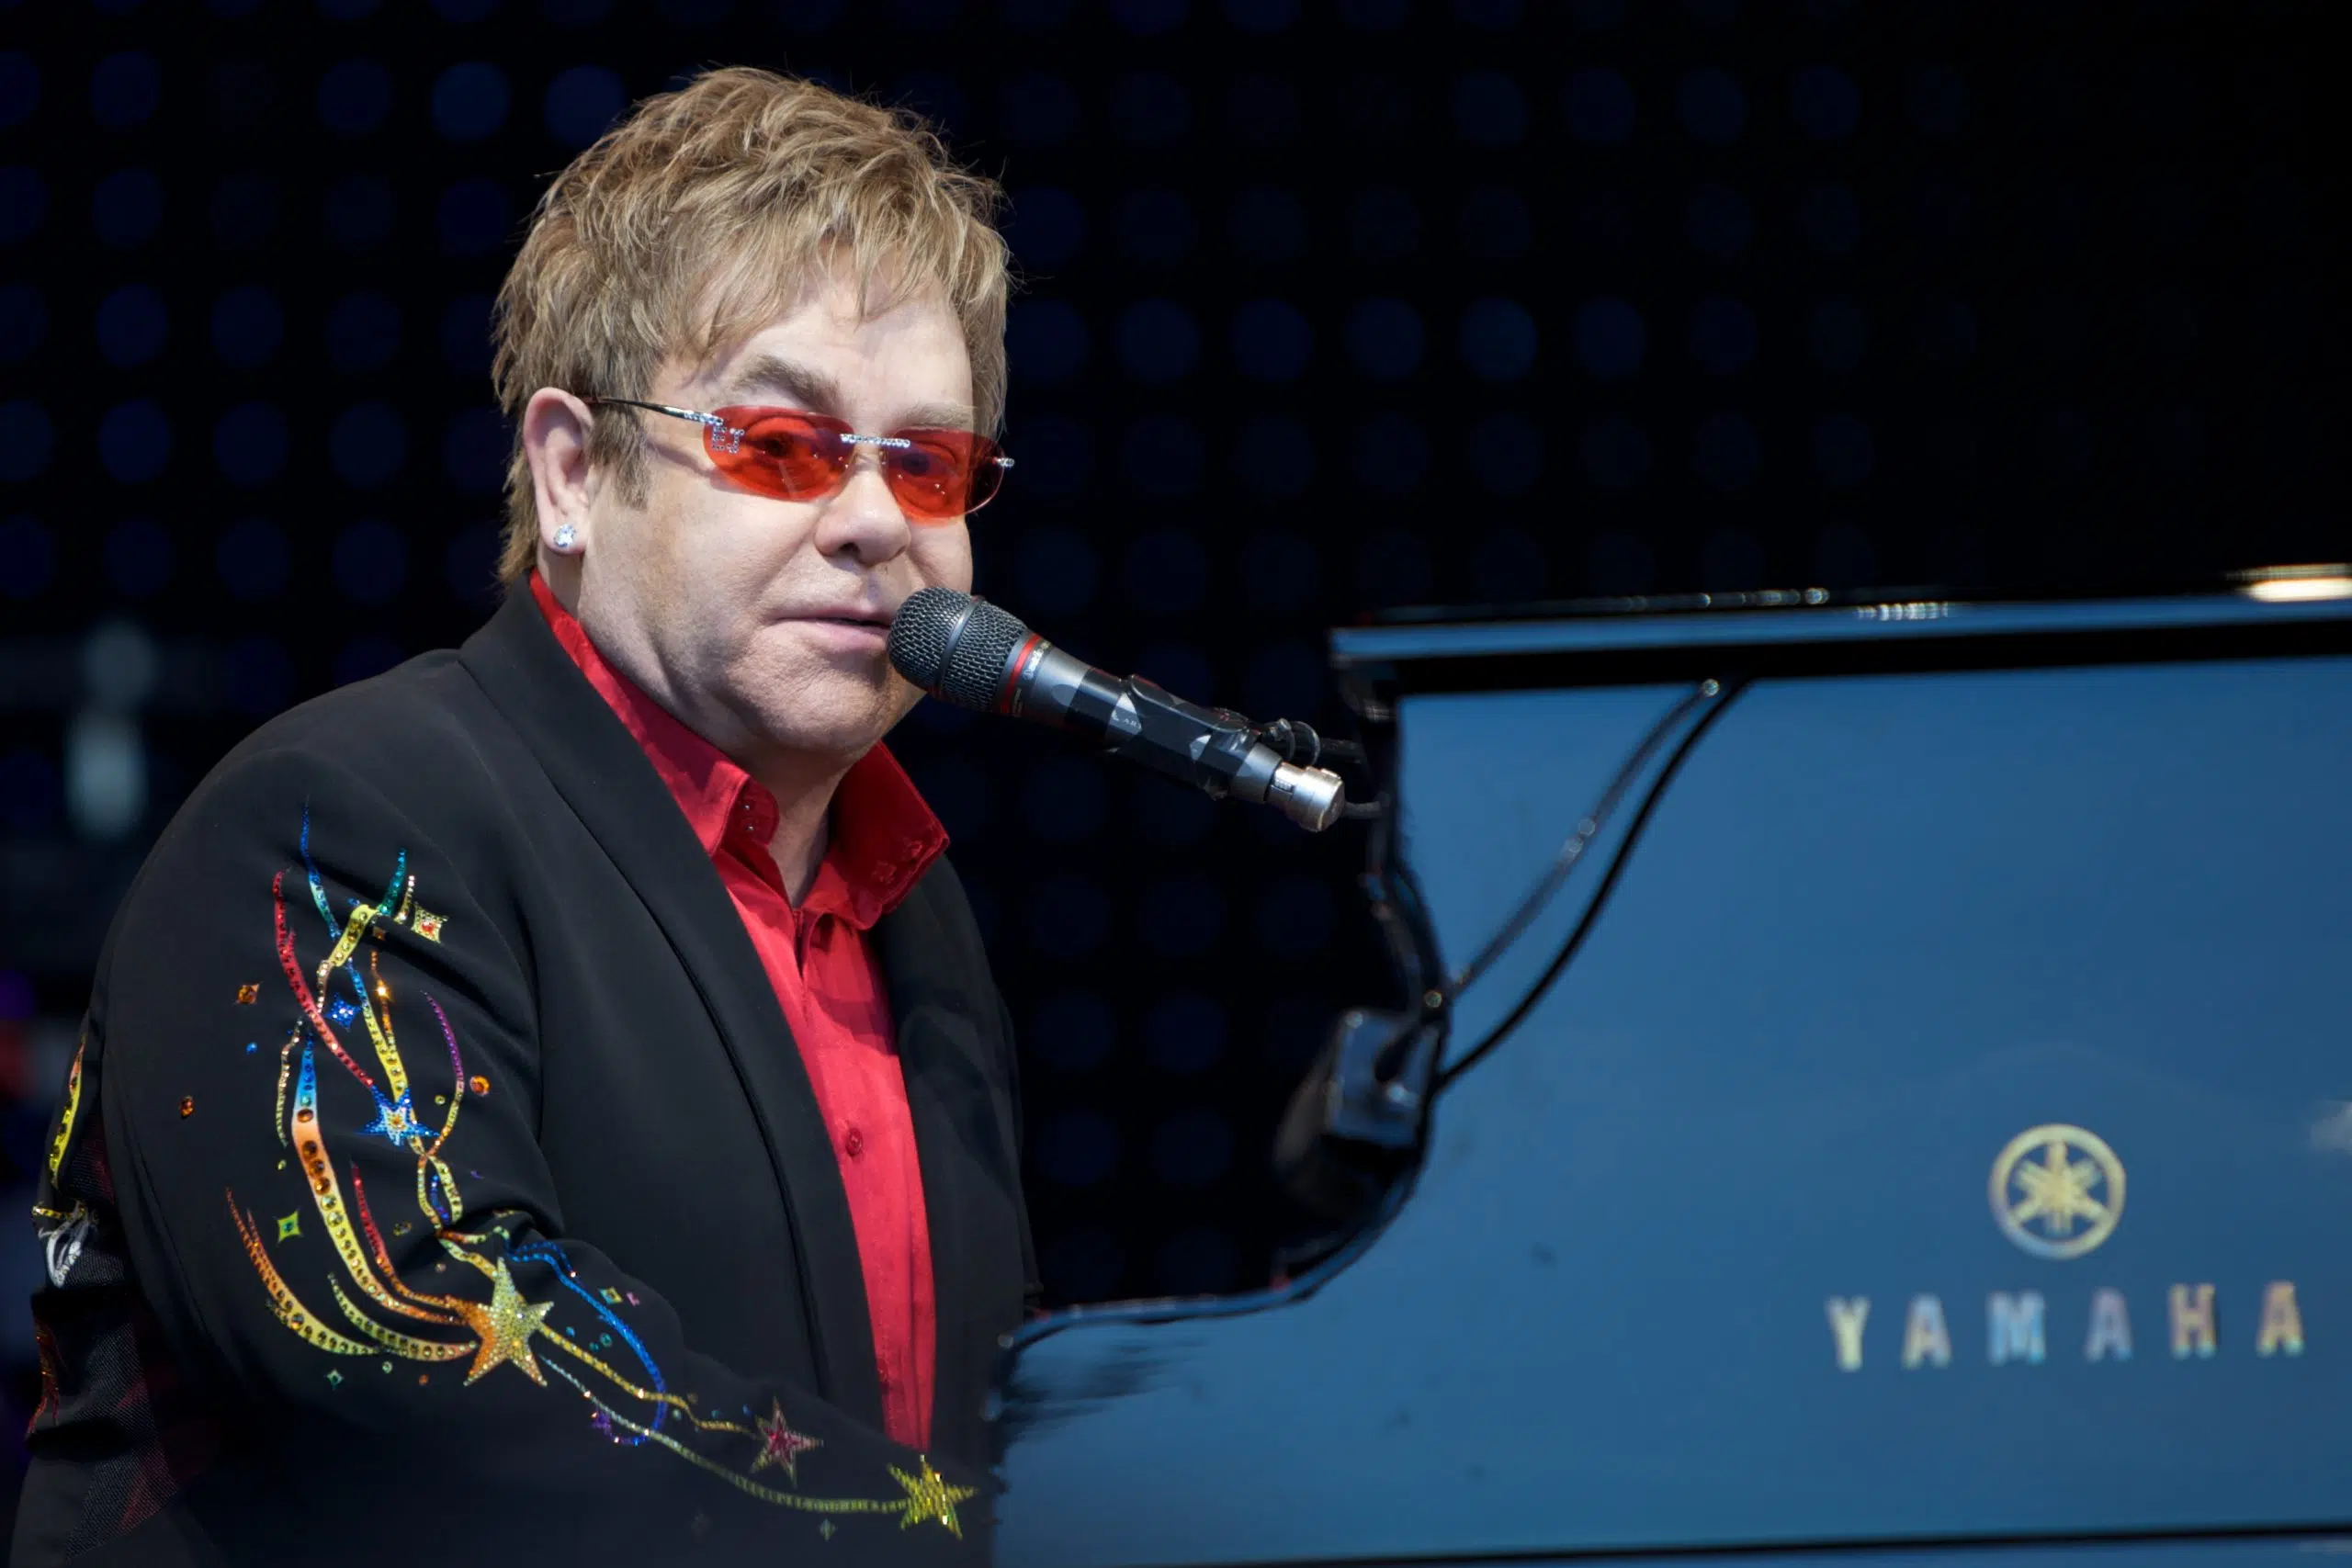 Watch Elton John Pay Tribute to his Late Mother with 'Your Song'